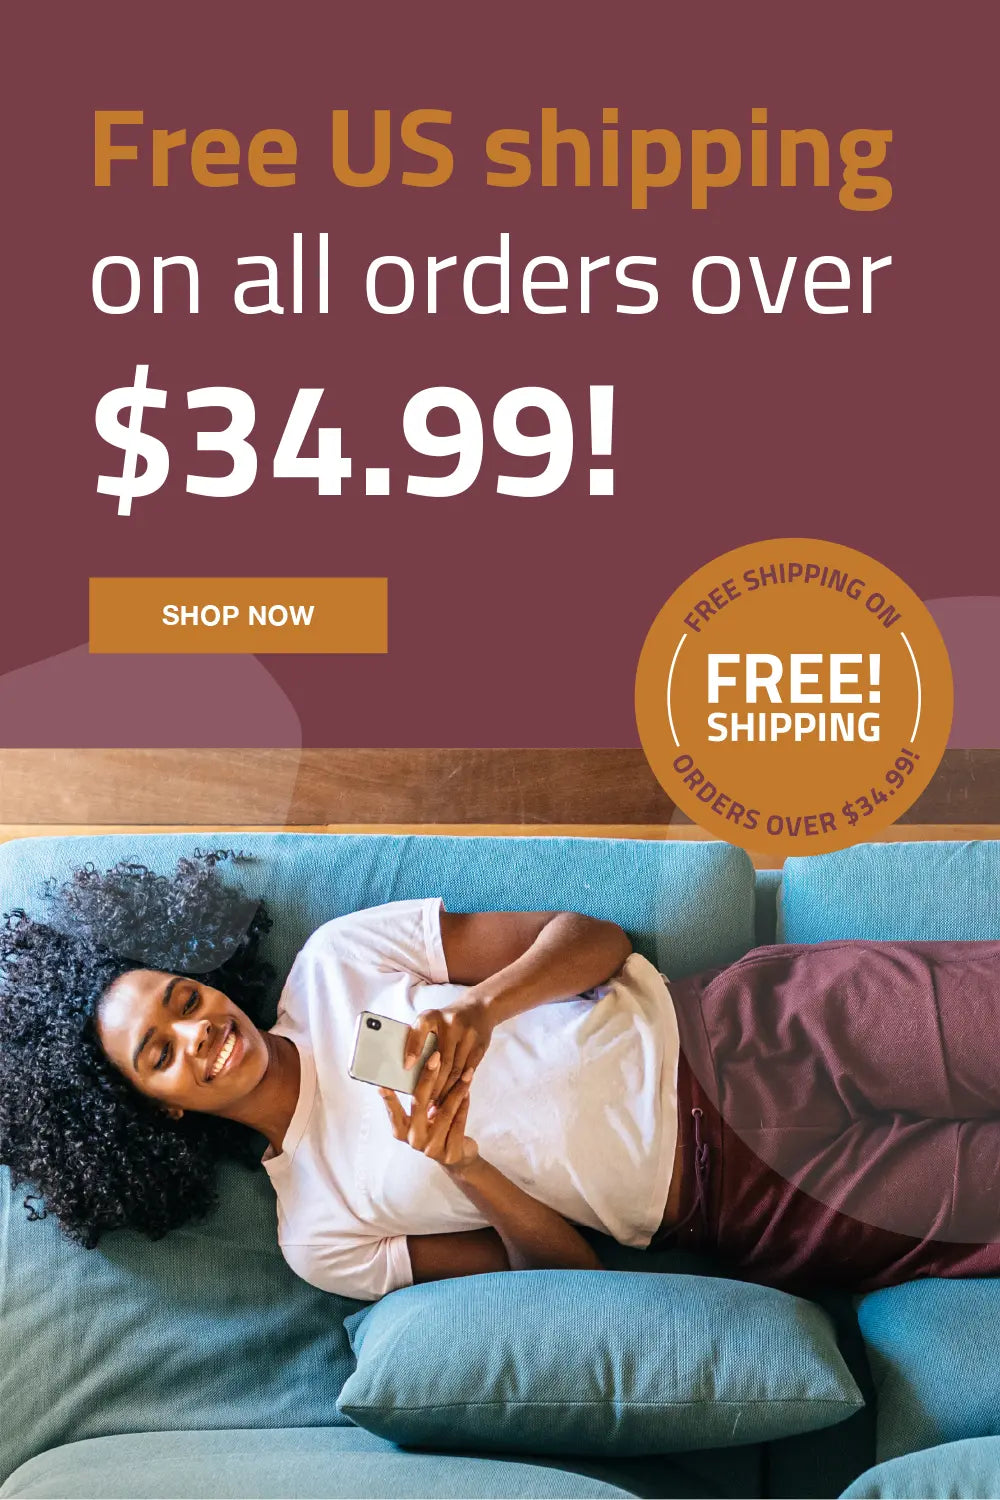 Free US shipping on all orders over $34.99